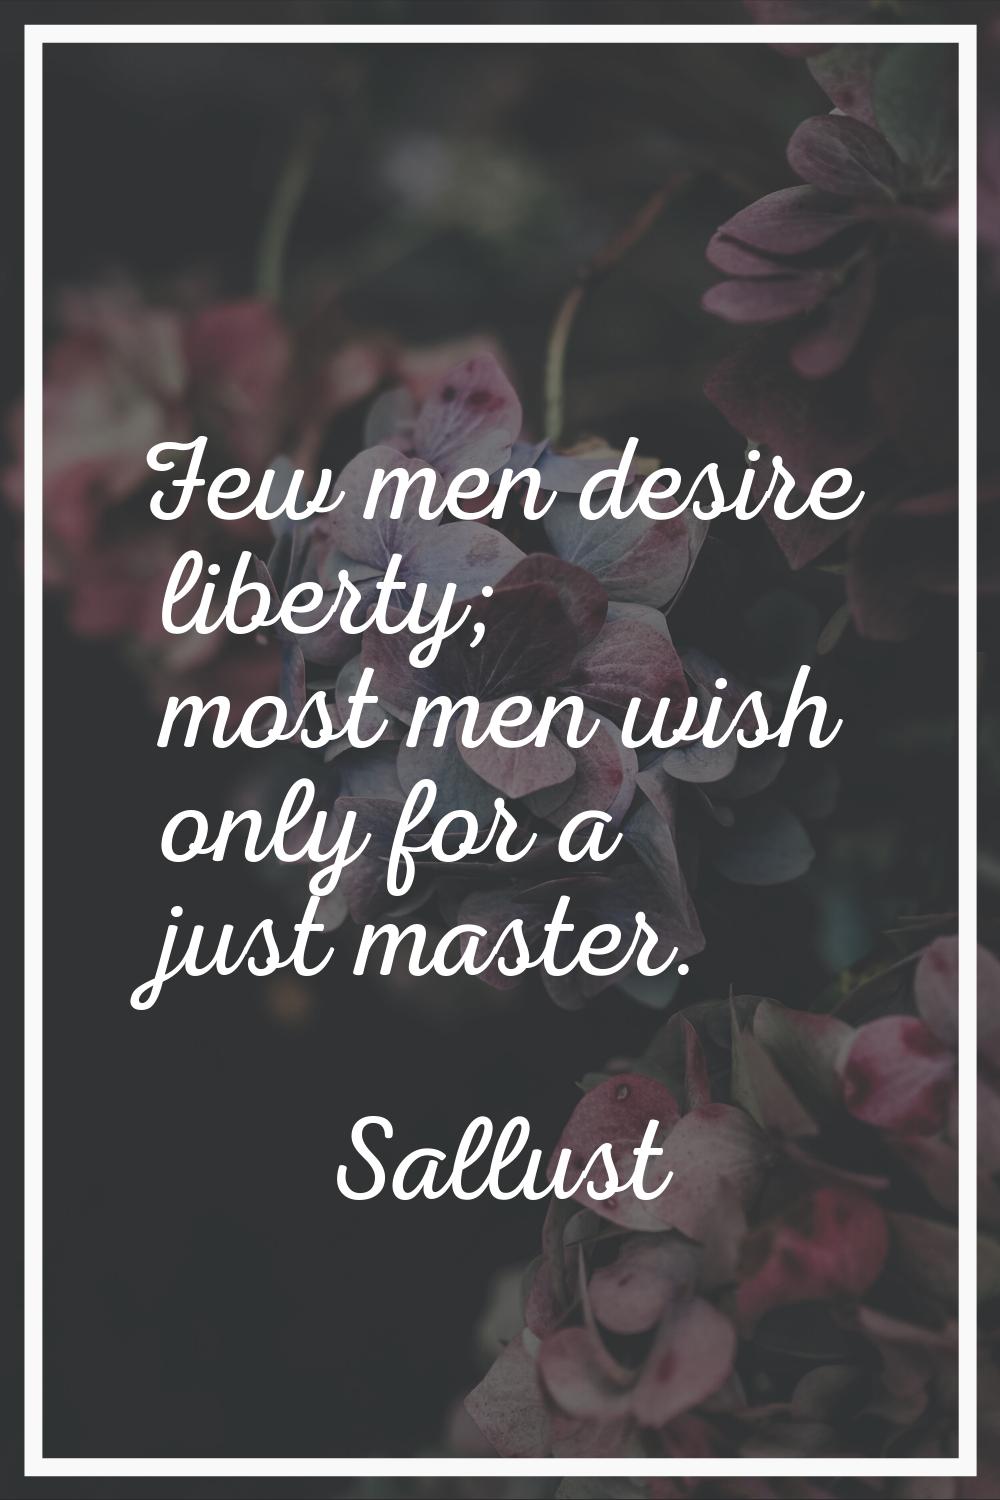 Few men desire liberty; most men wish only for a just master.